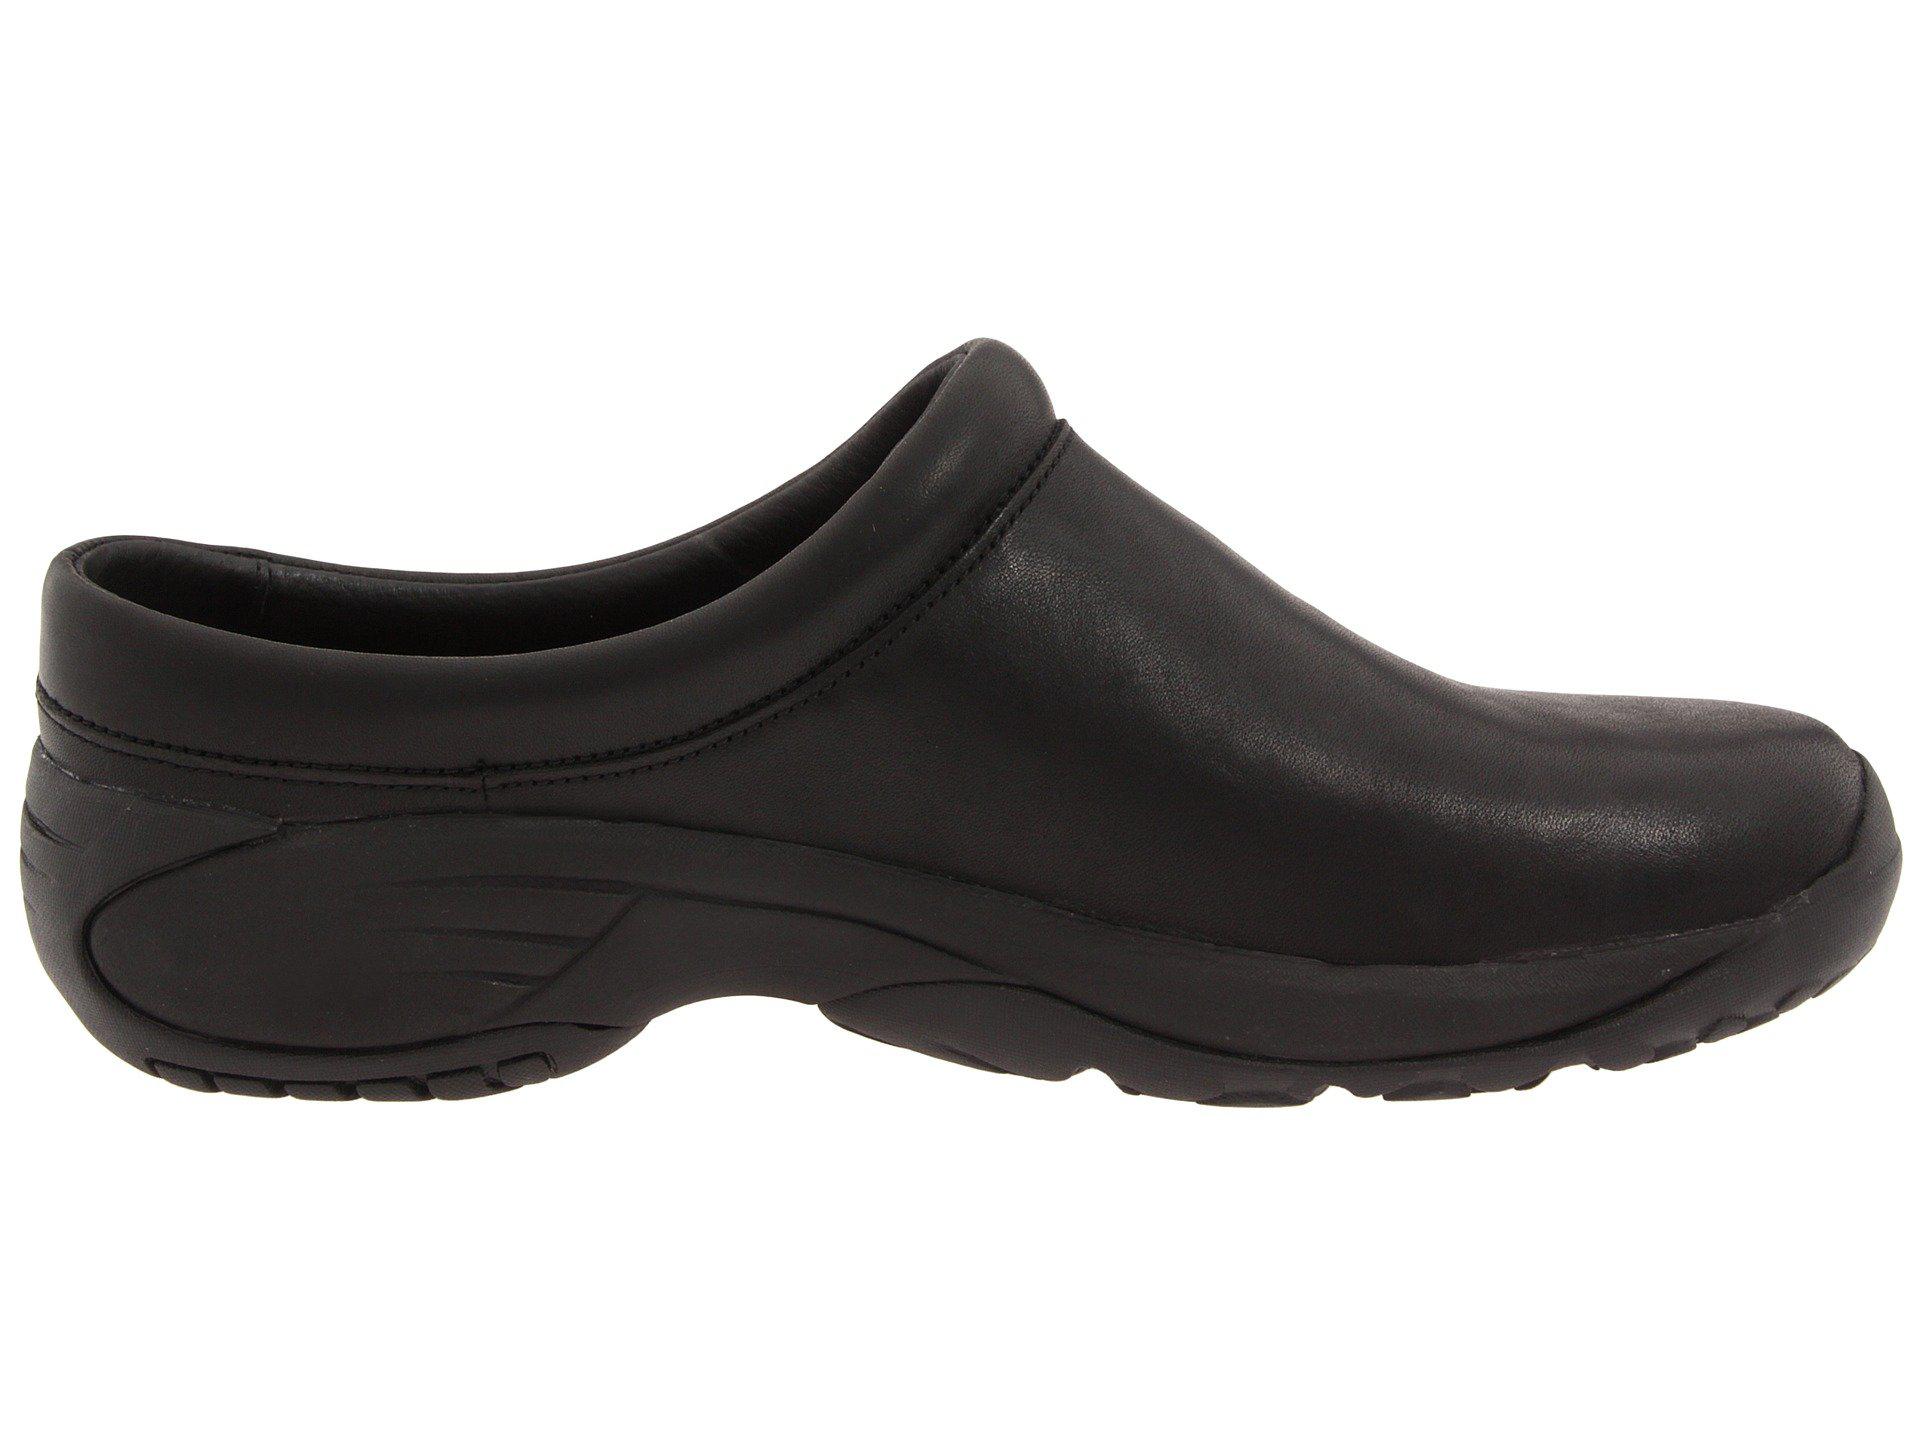 Lyst - Merrell Encore Gust (smooth Black Leather) Men's Slip On Shoes ...